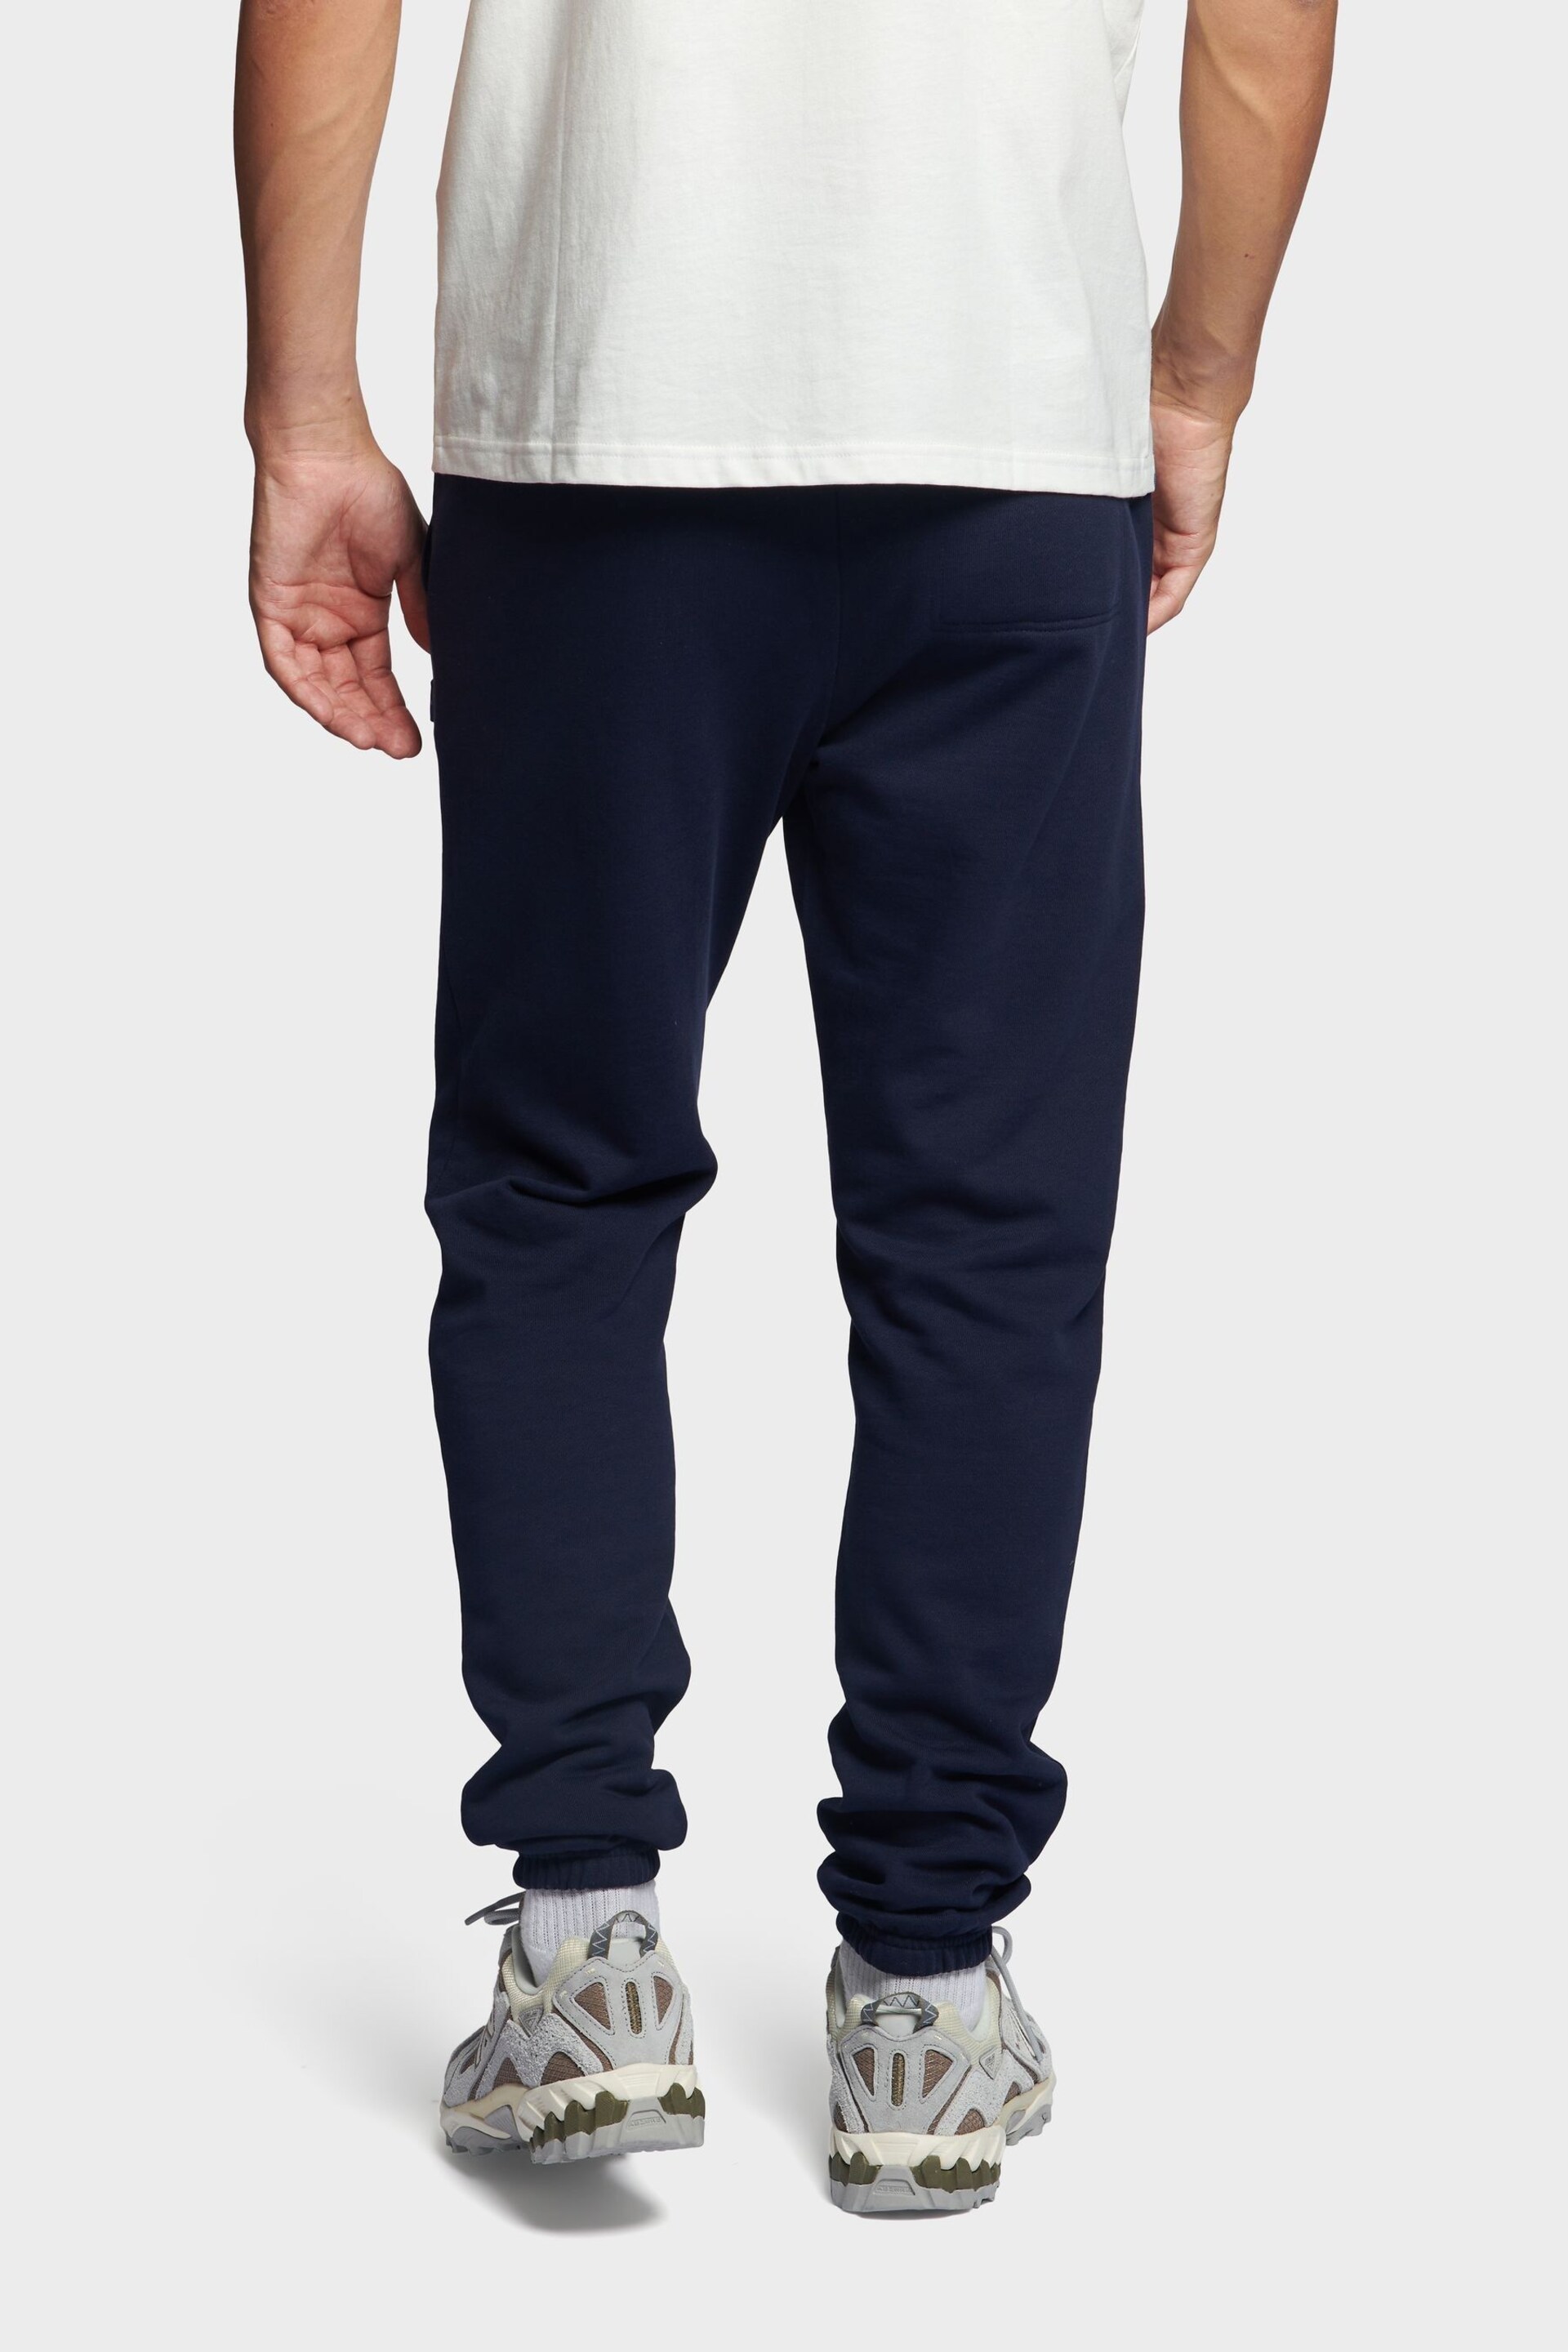 Penfield Mens Relaxed Fit Original Logo Joggers - Image 3 of 5